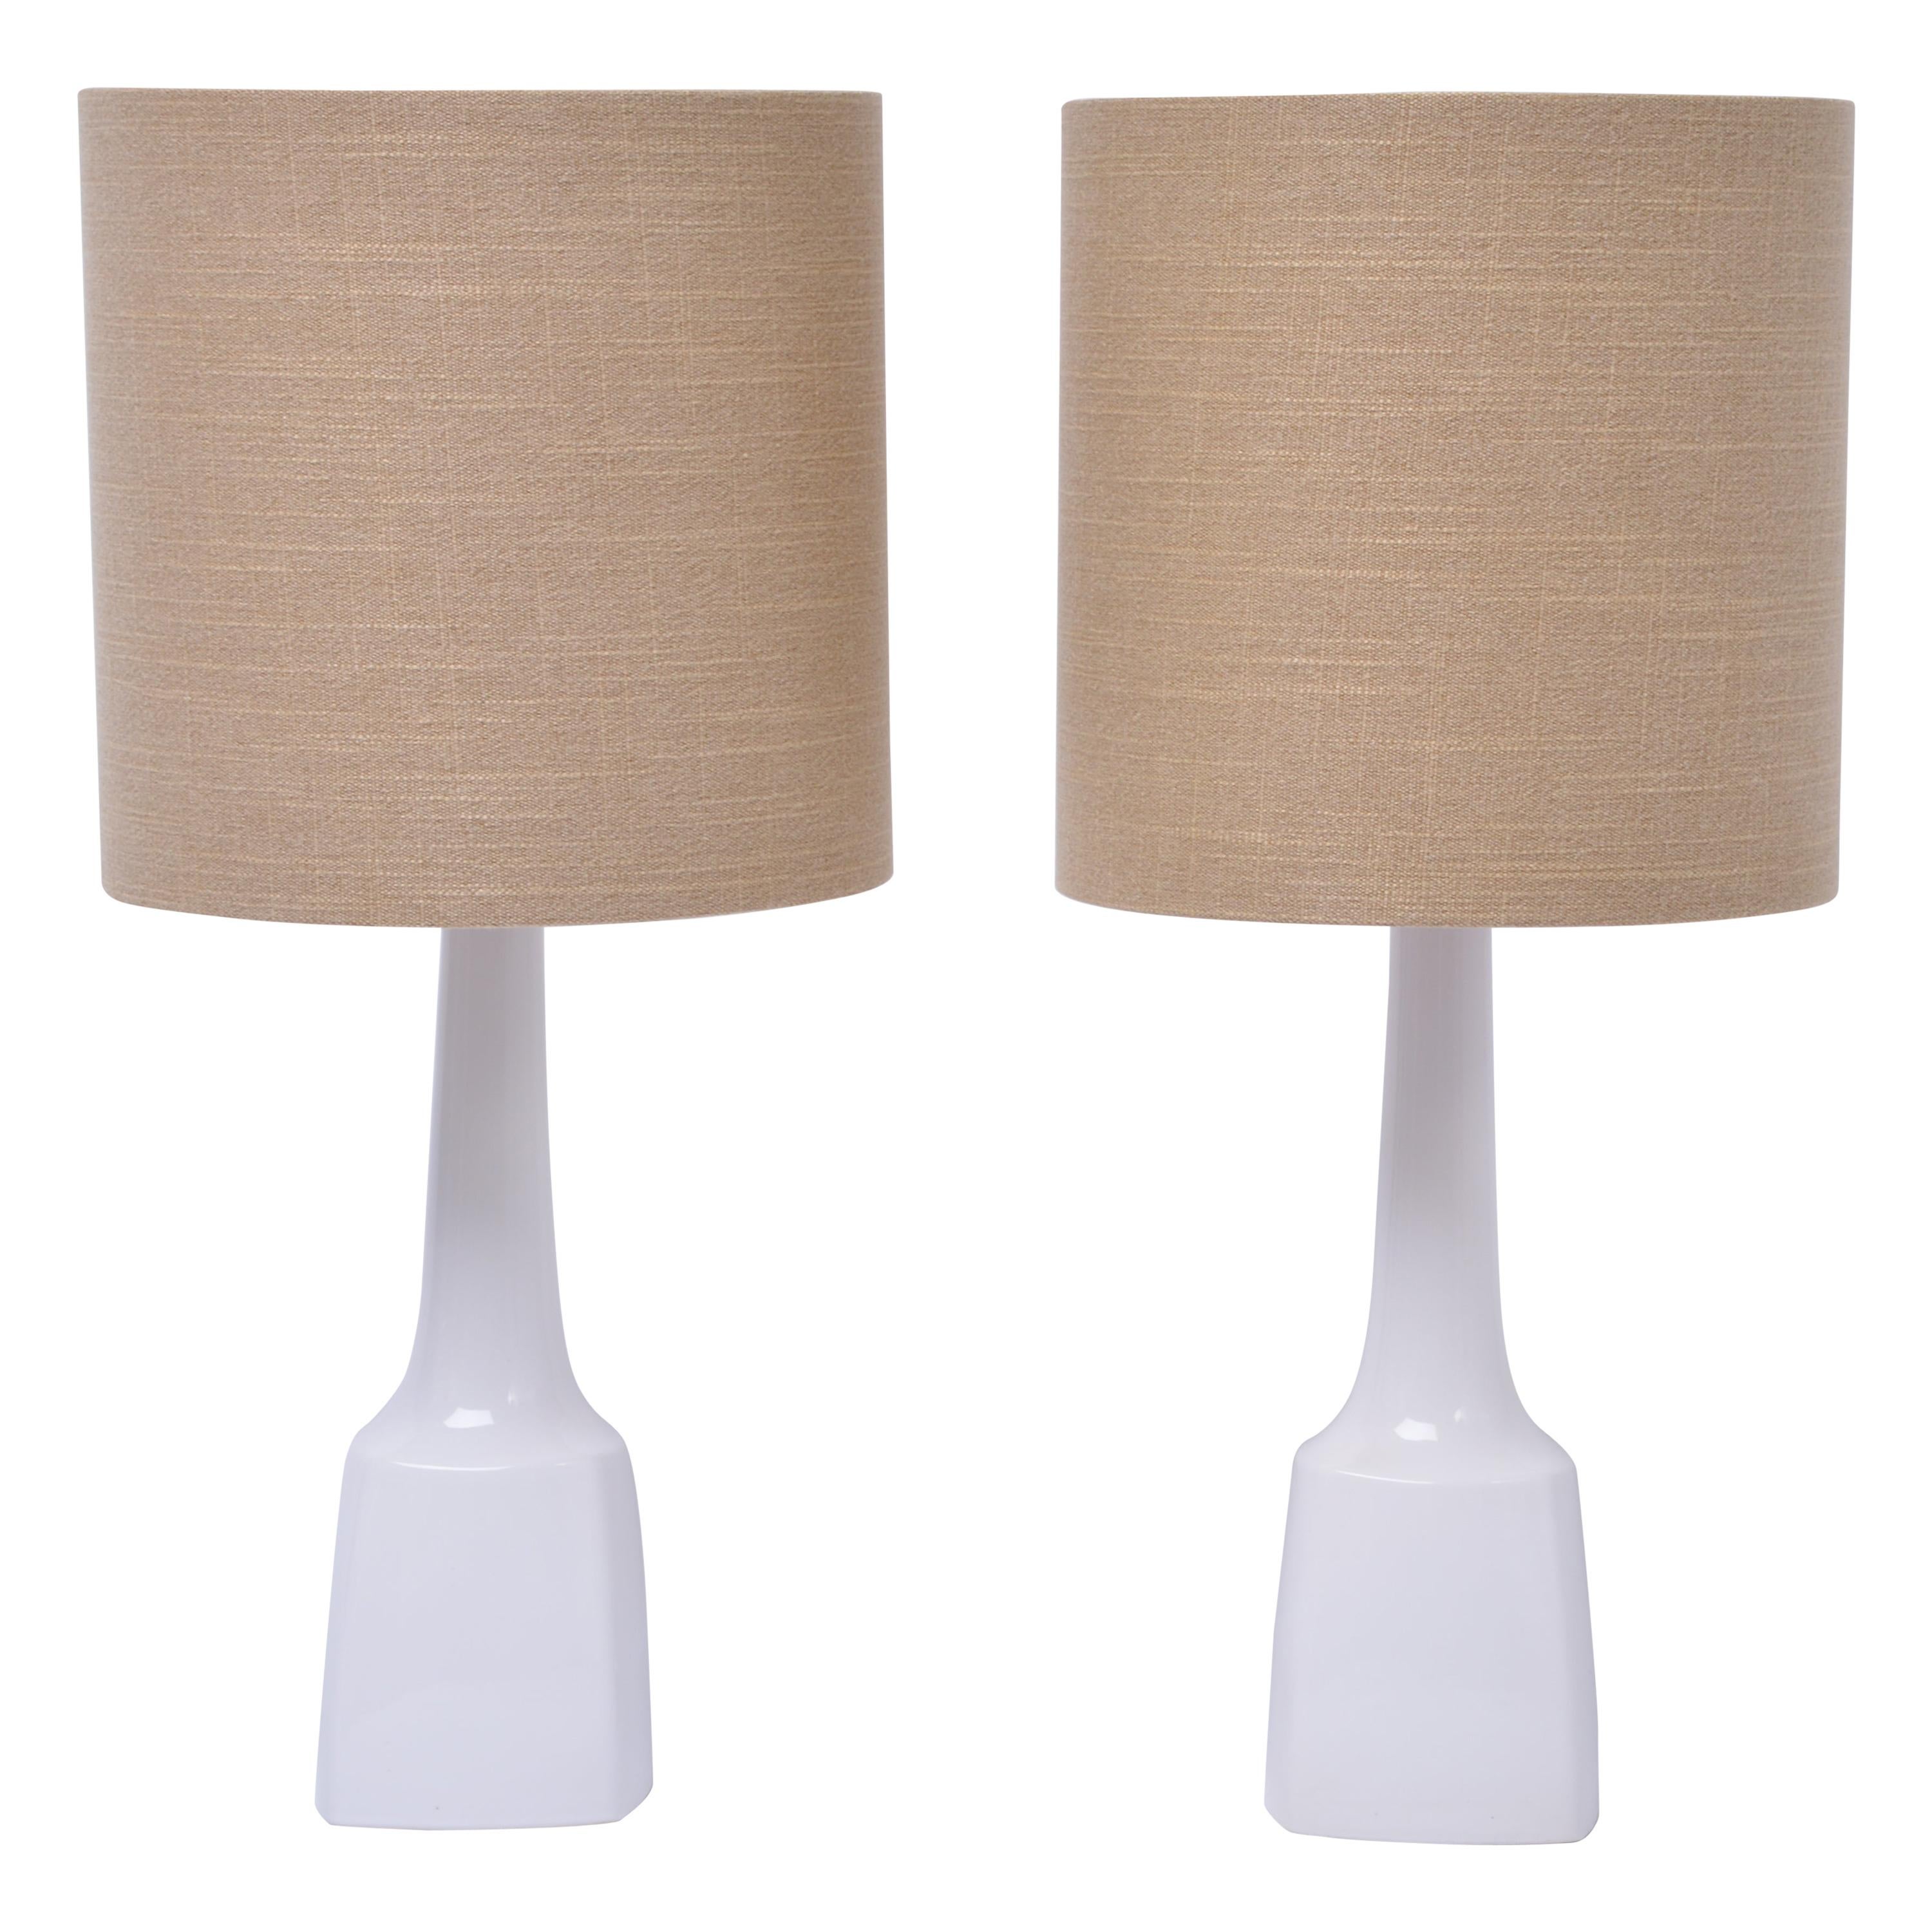 Pair of White Mid-Century Modern Ceramic Table Lamps Model 941 by Soholm